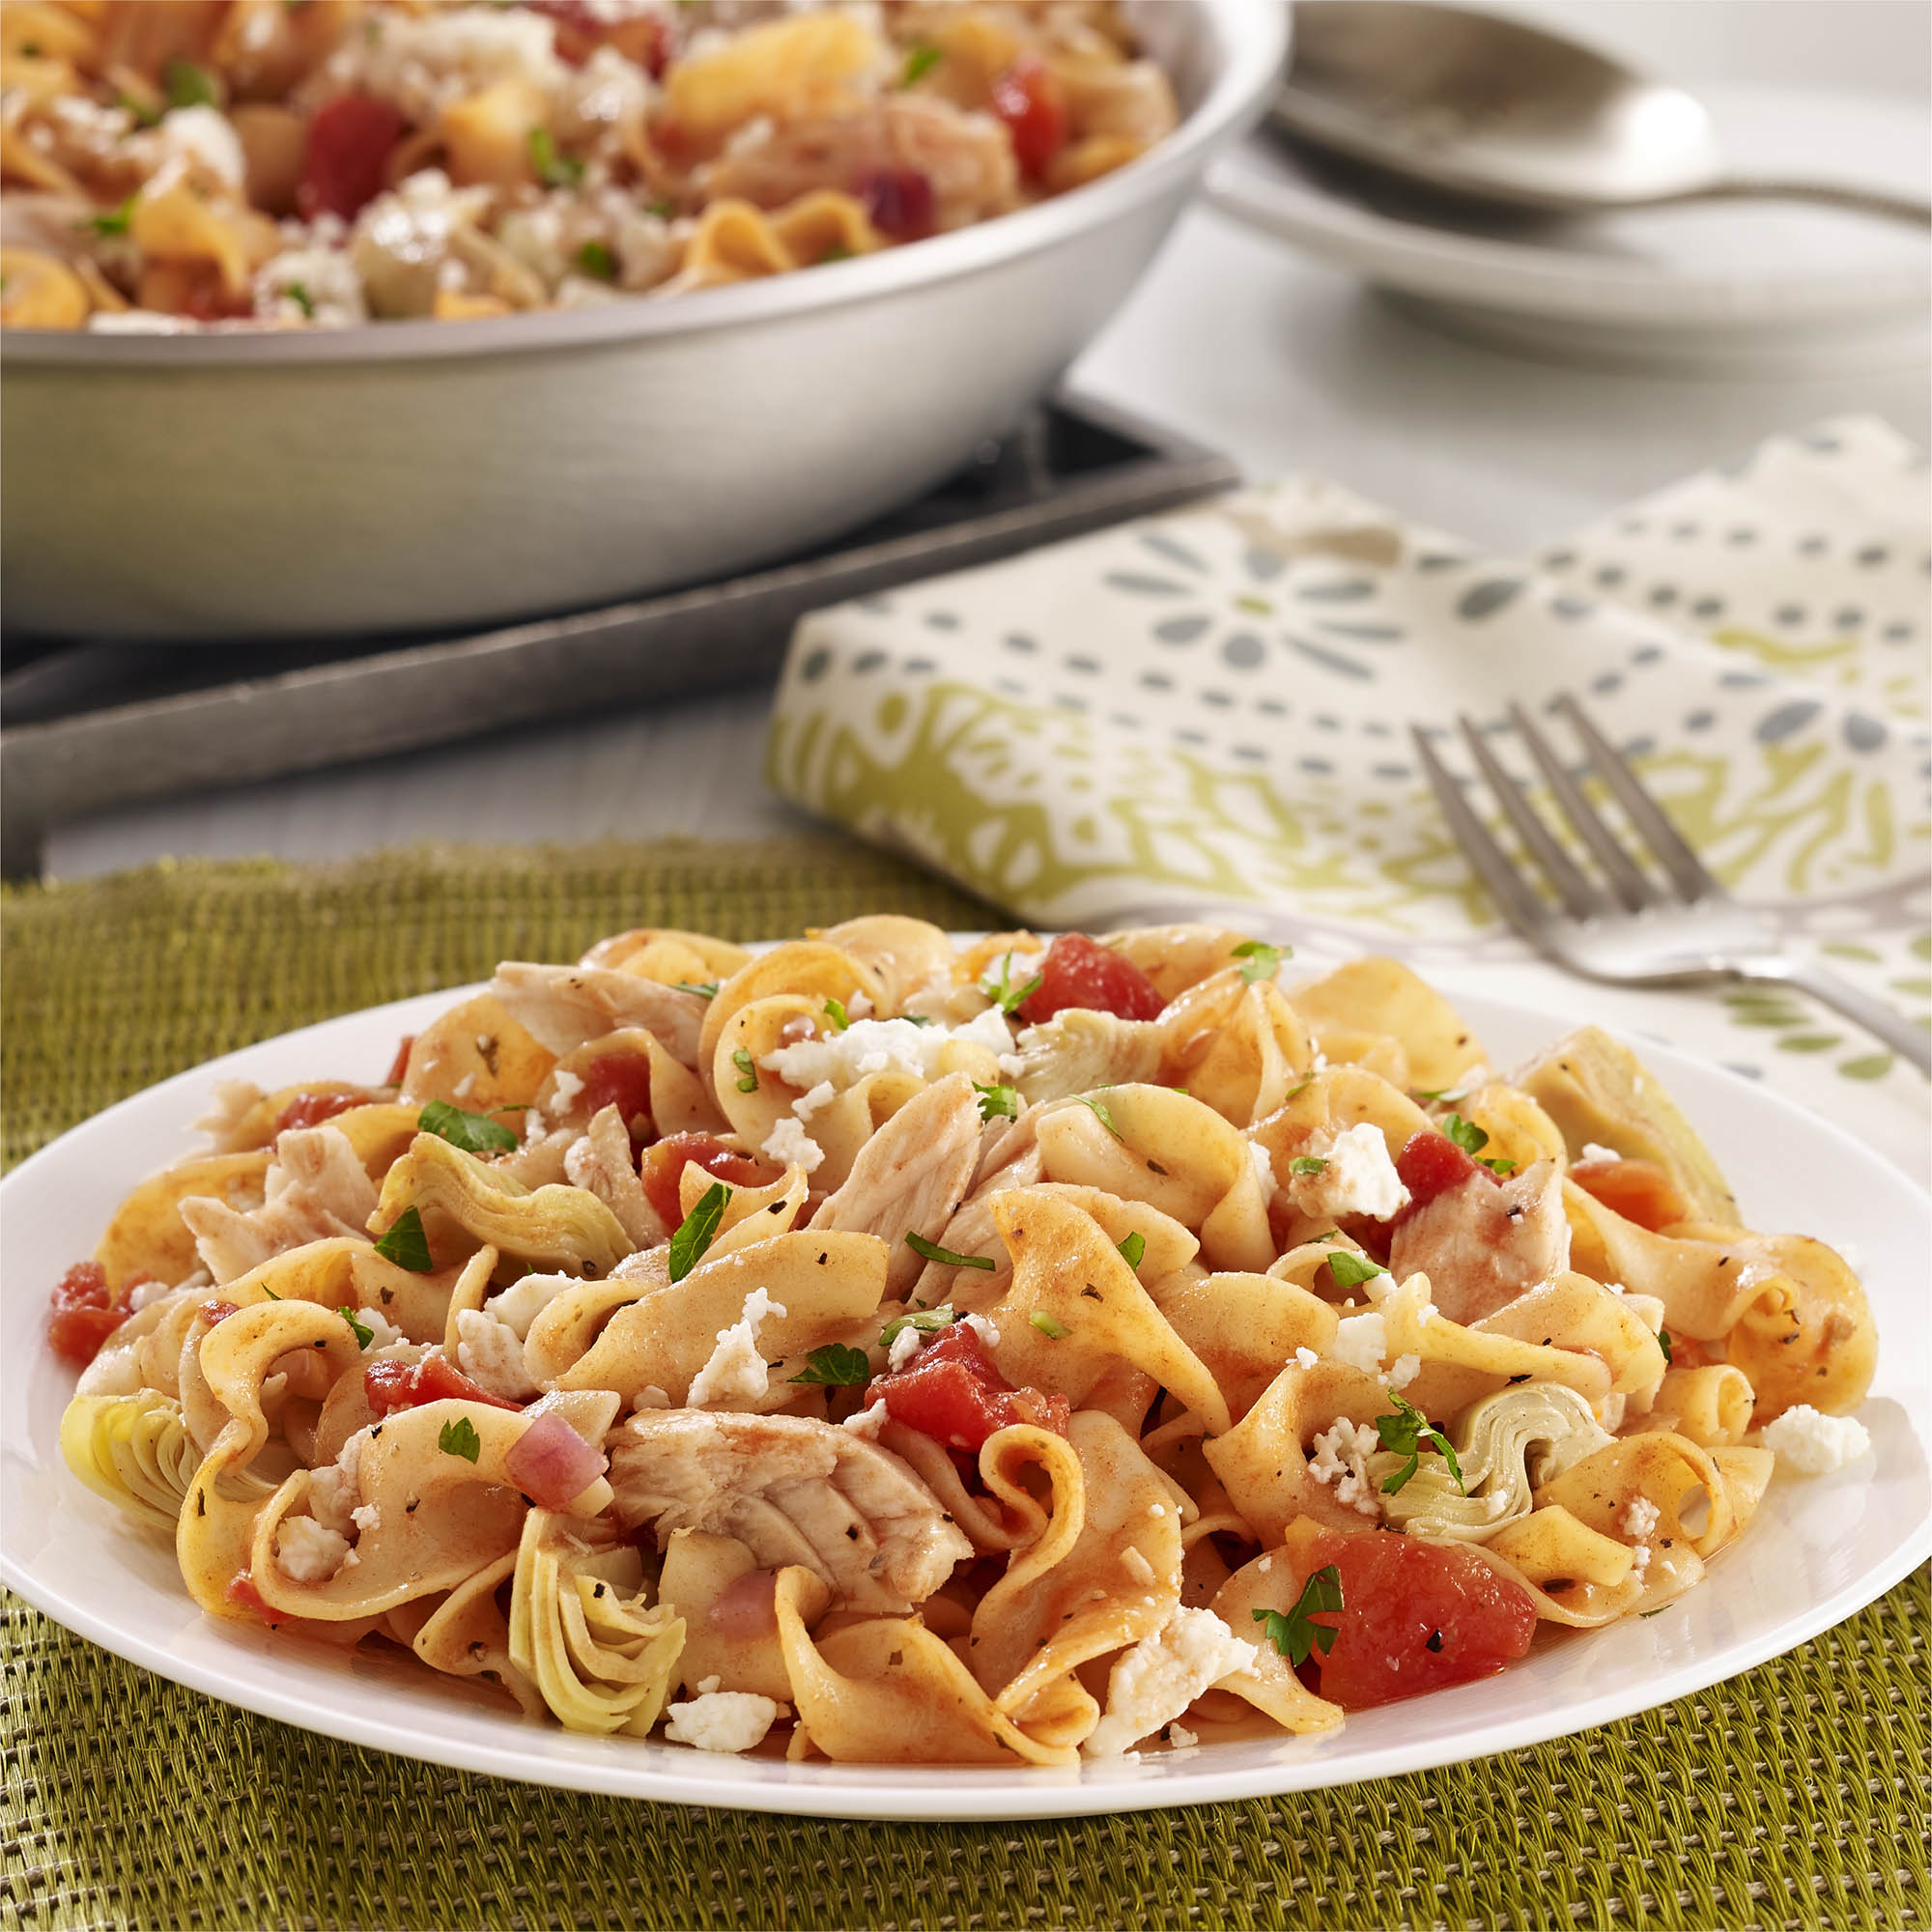 Mediterranean Tuna Noodle Skillet Tuna and noodles gets a modern twist thanks to fresh, new flavors from artichokes, tomato and feta cheese. Ready in just 30 minutes!